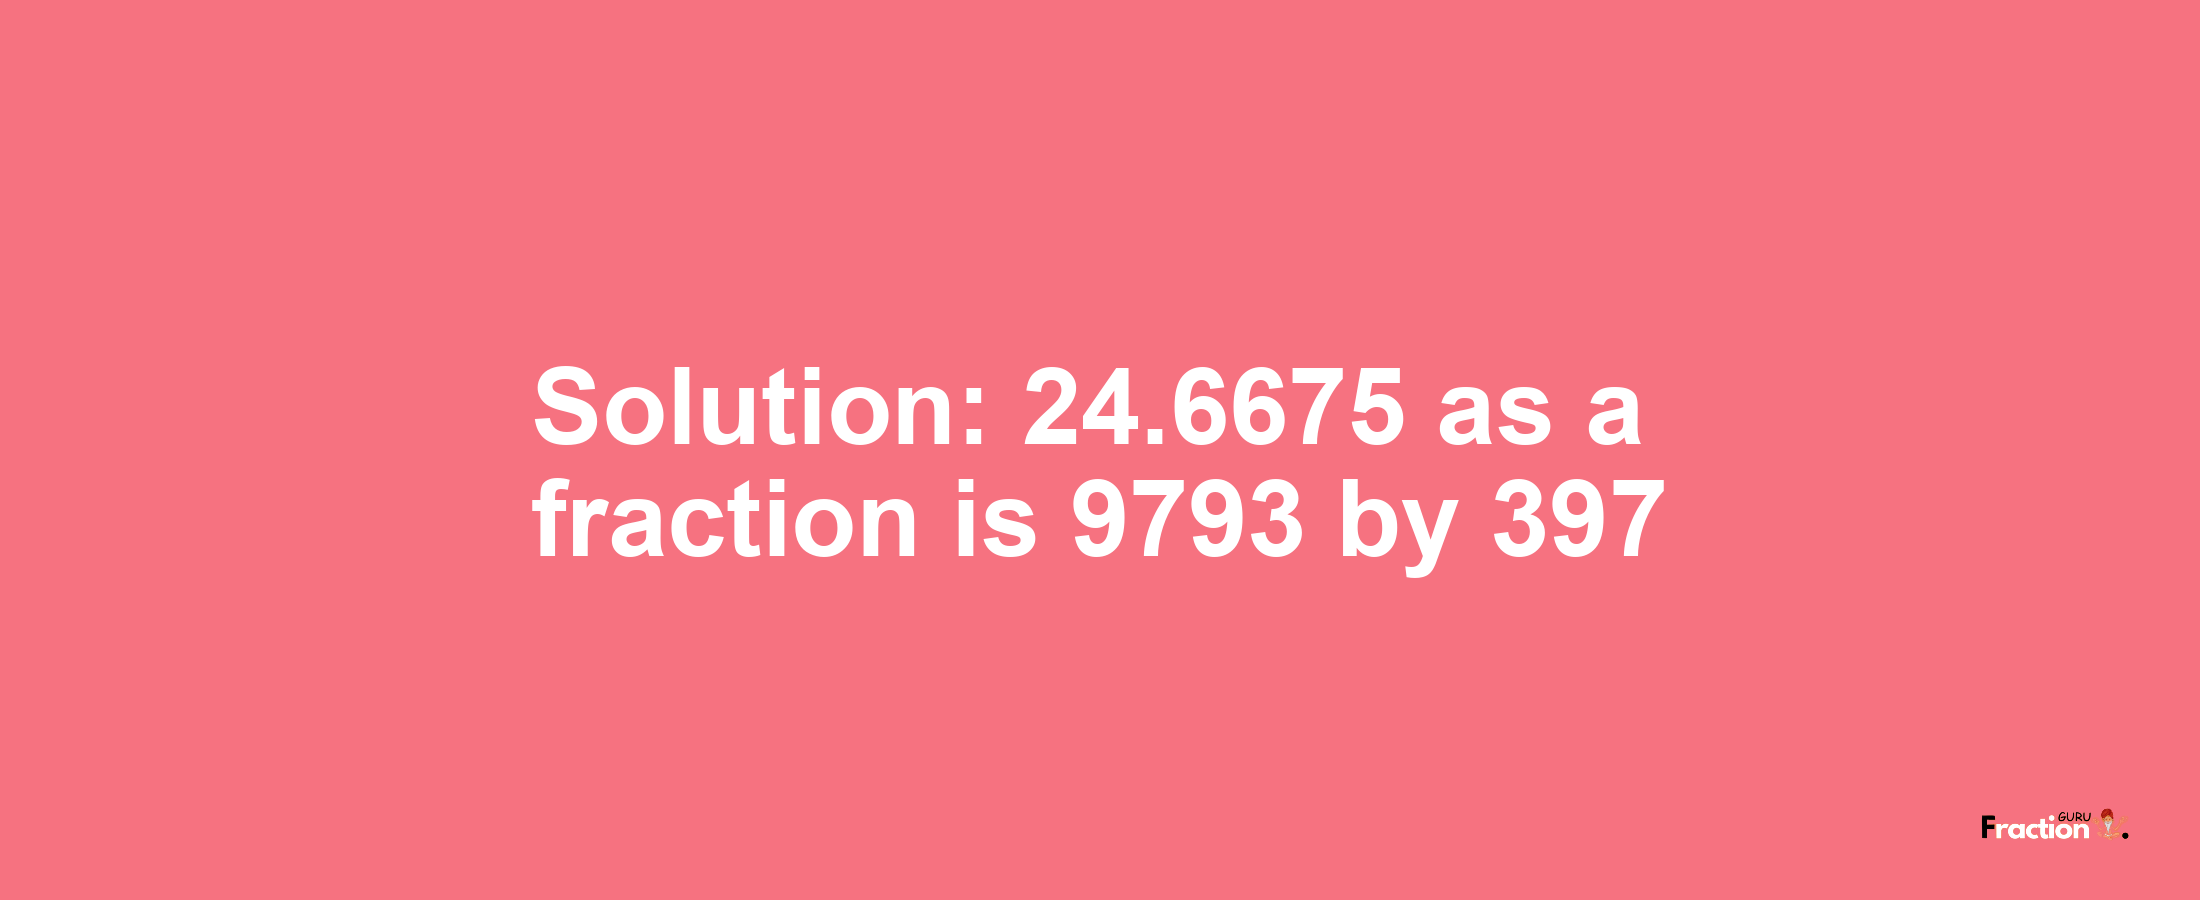 Solution:24.6675 as a fraction is 9793/397